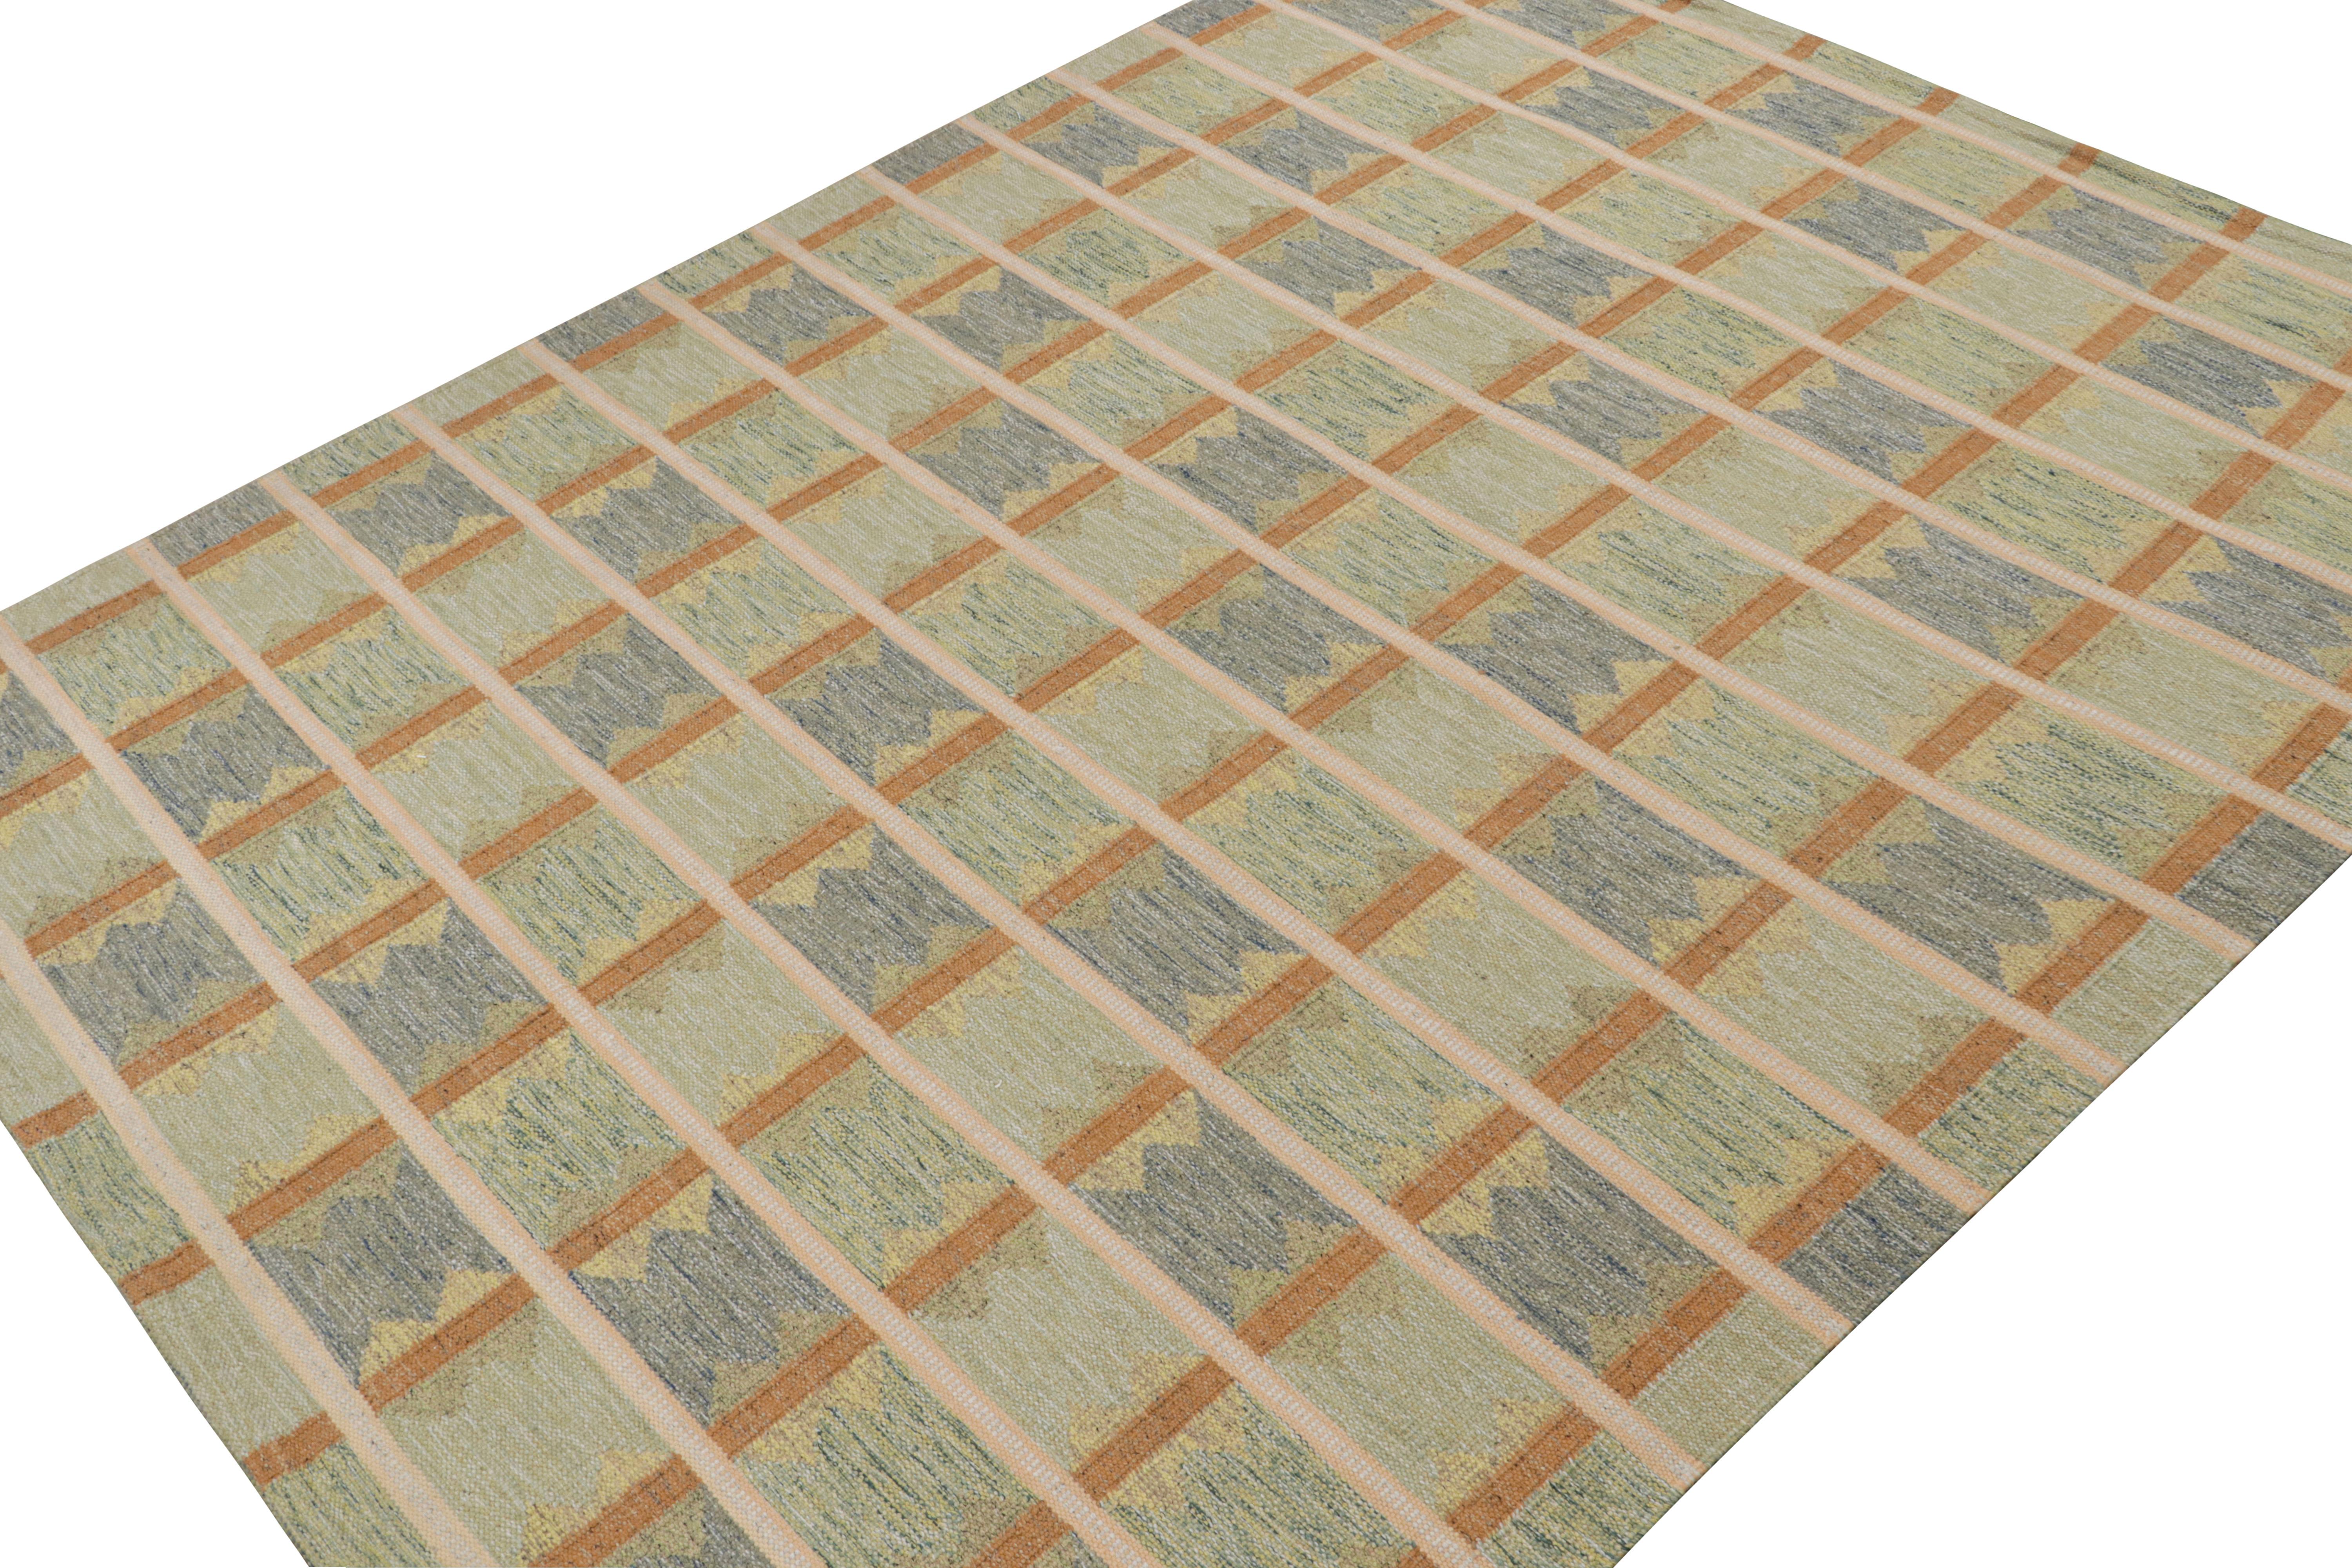 A smart 10x14 Swedish style kilim from our award-winning Scandinavian flat weave collection. Handwoven in wool, cotton & undyed natural yarn.

On the Design: 

This rug enjoys geometric patterns in blue, green & orange. Keen eyes will admire undyed,